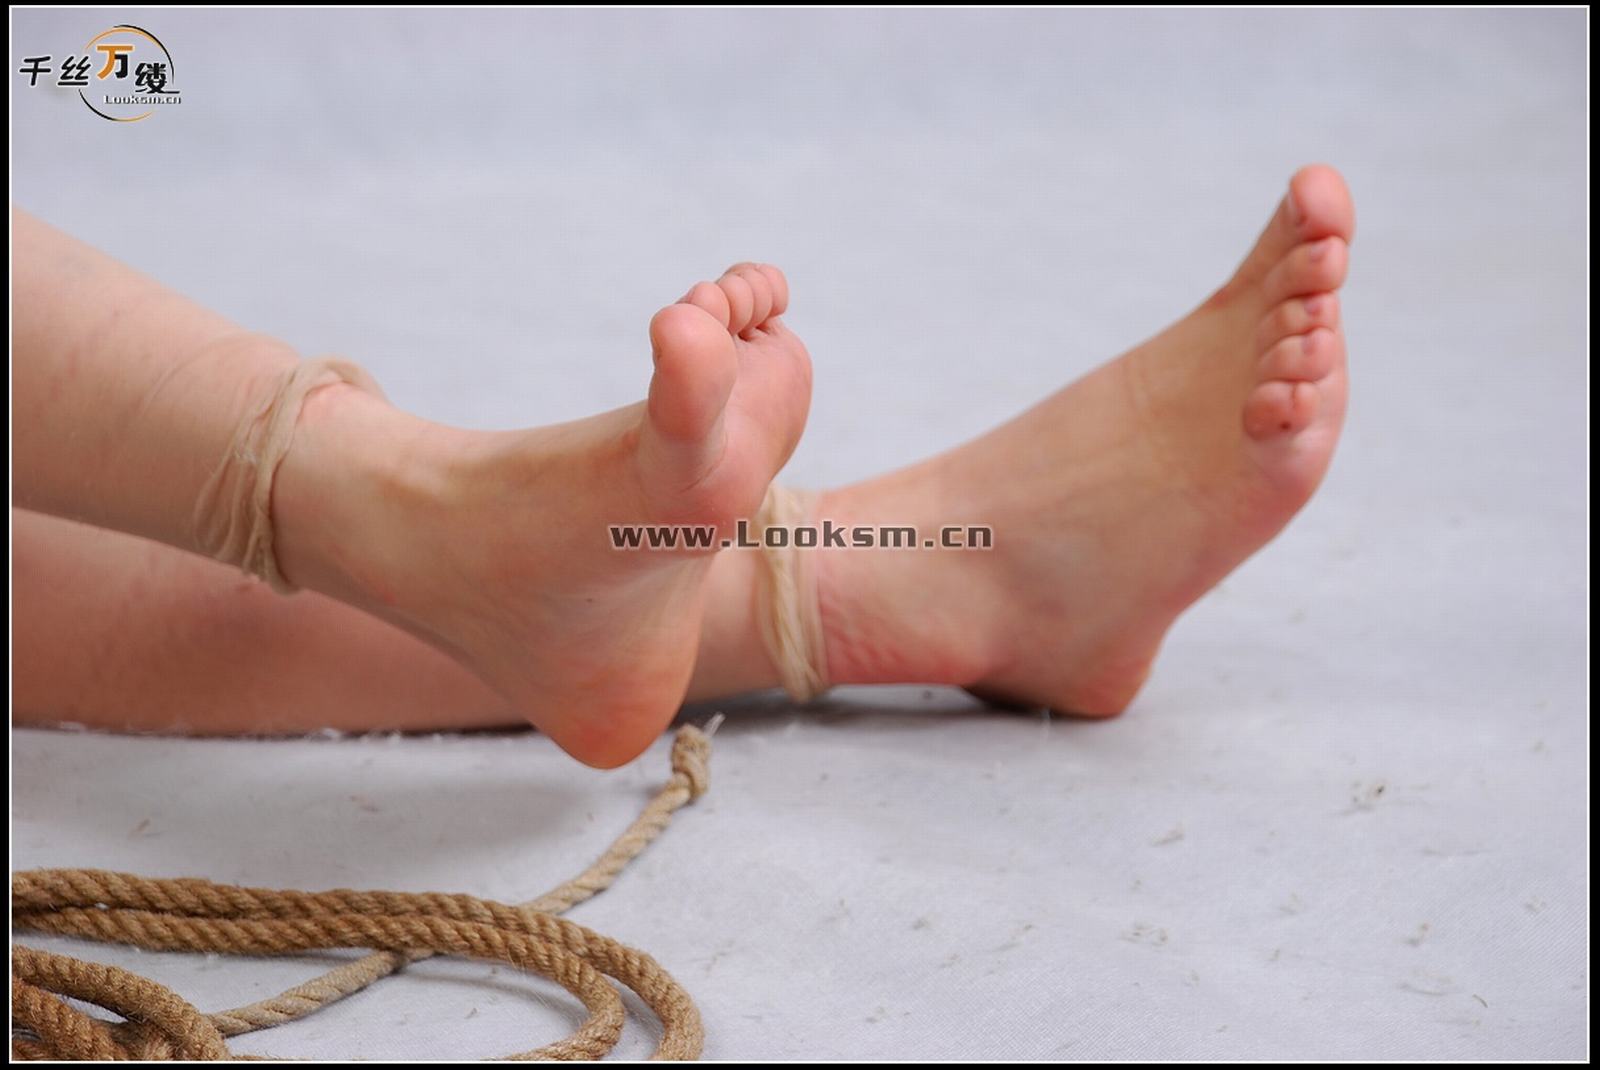 Chinese Rope Model 266